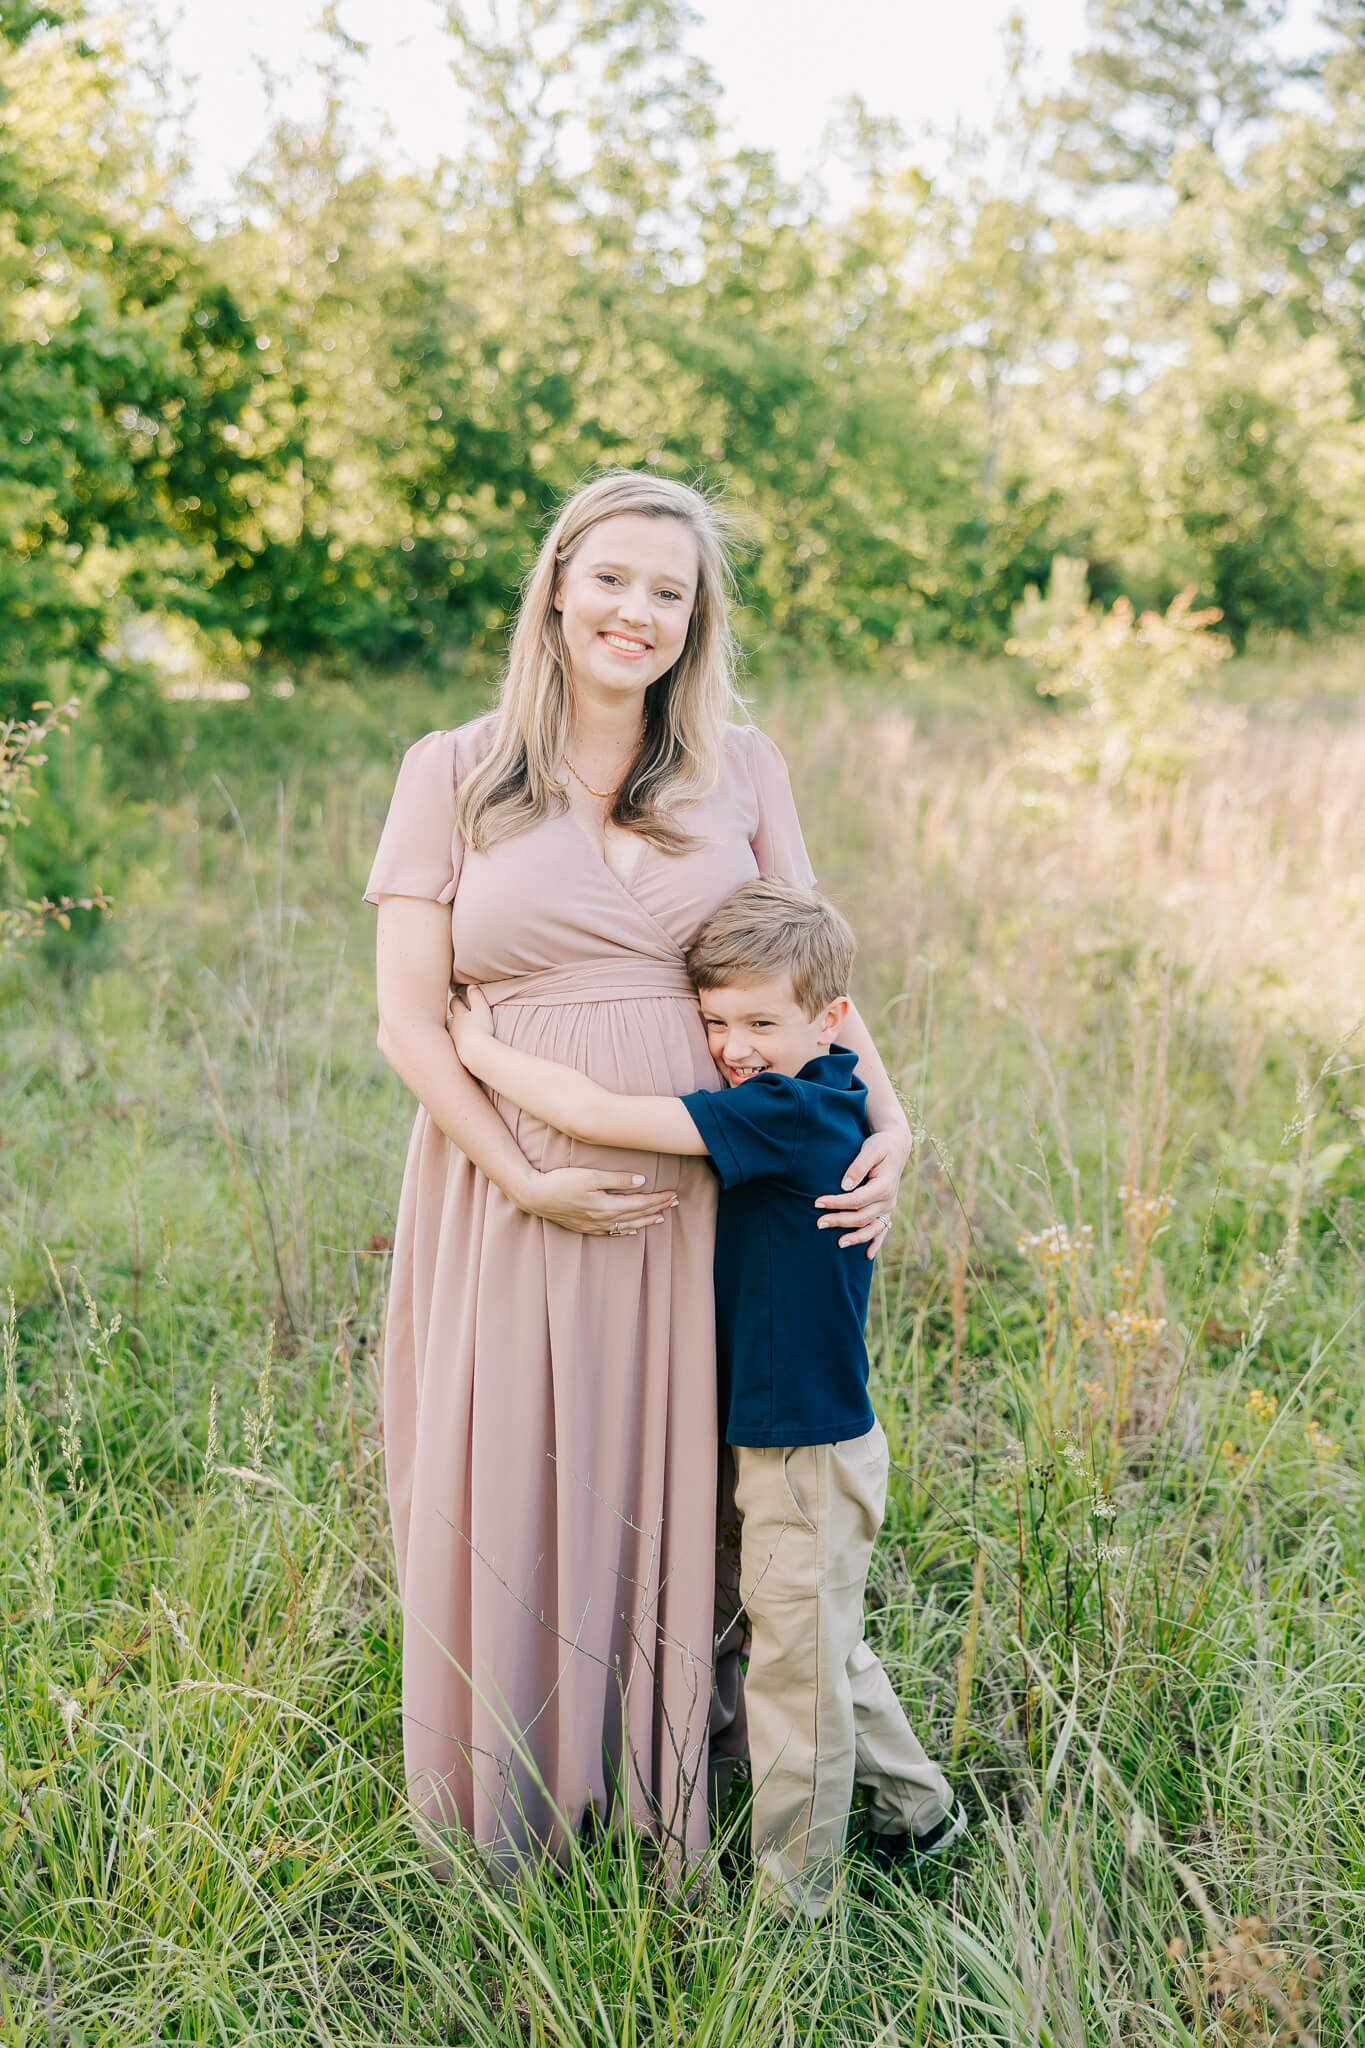 Expecting mom and her son sharing a hug during their columbia sc maternity session. Mom is using a Midwives Columbia SC for her birth.